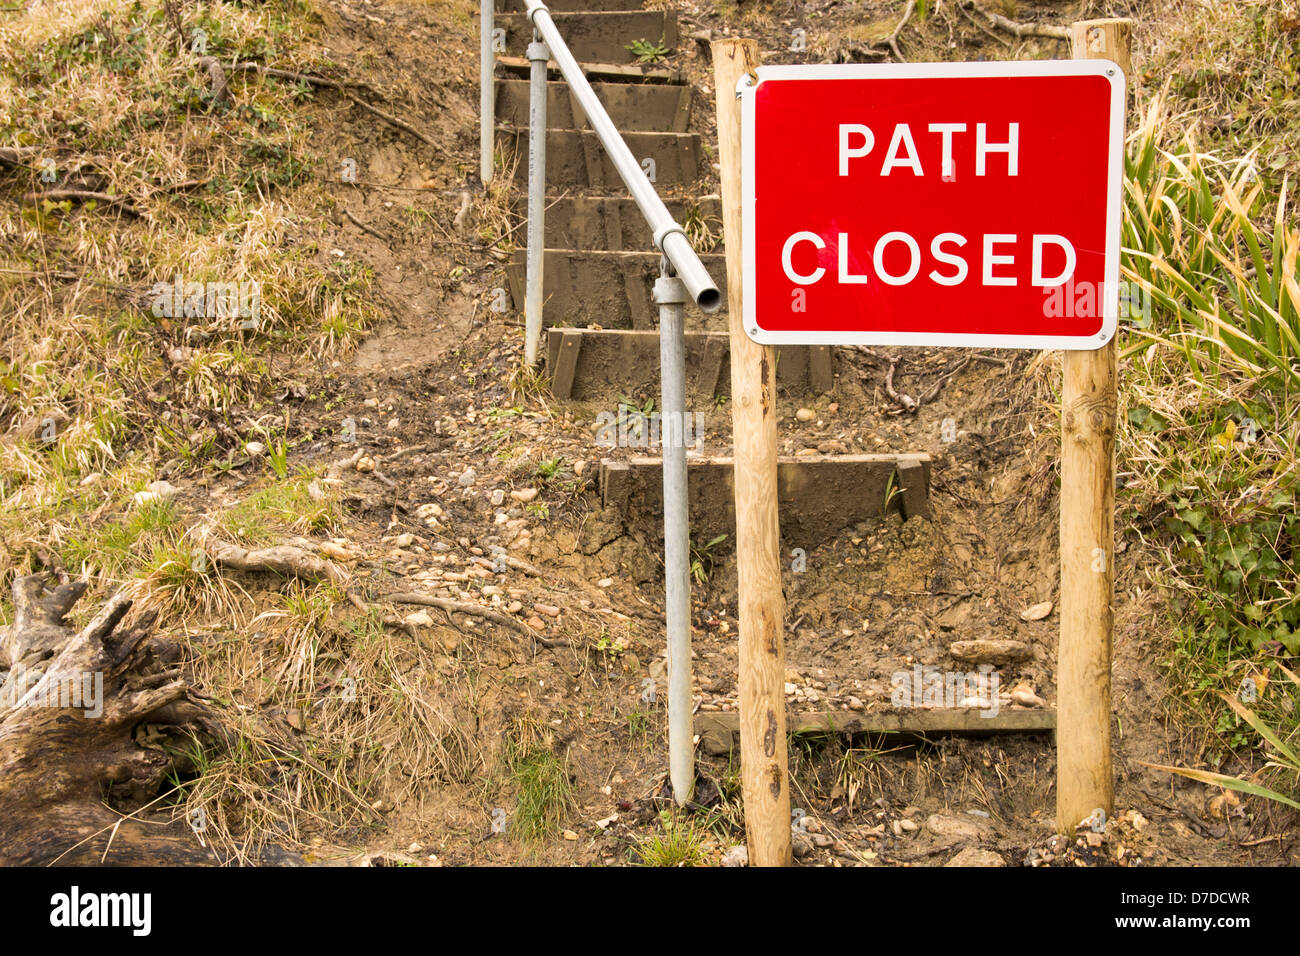 Warning sign saying a path is closed Stock Photo